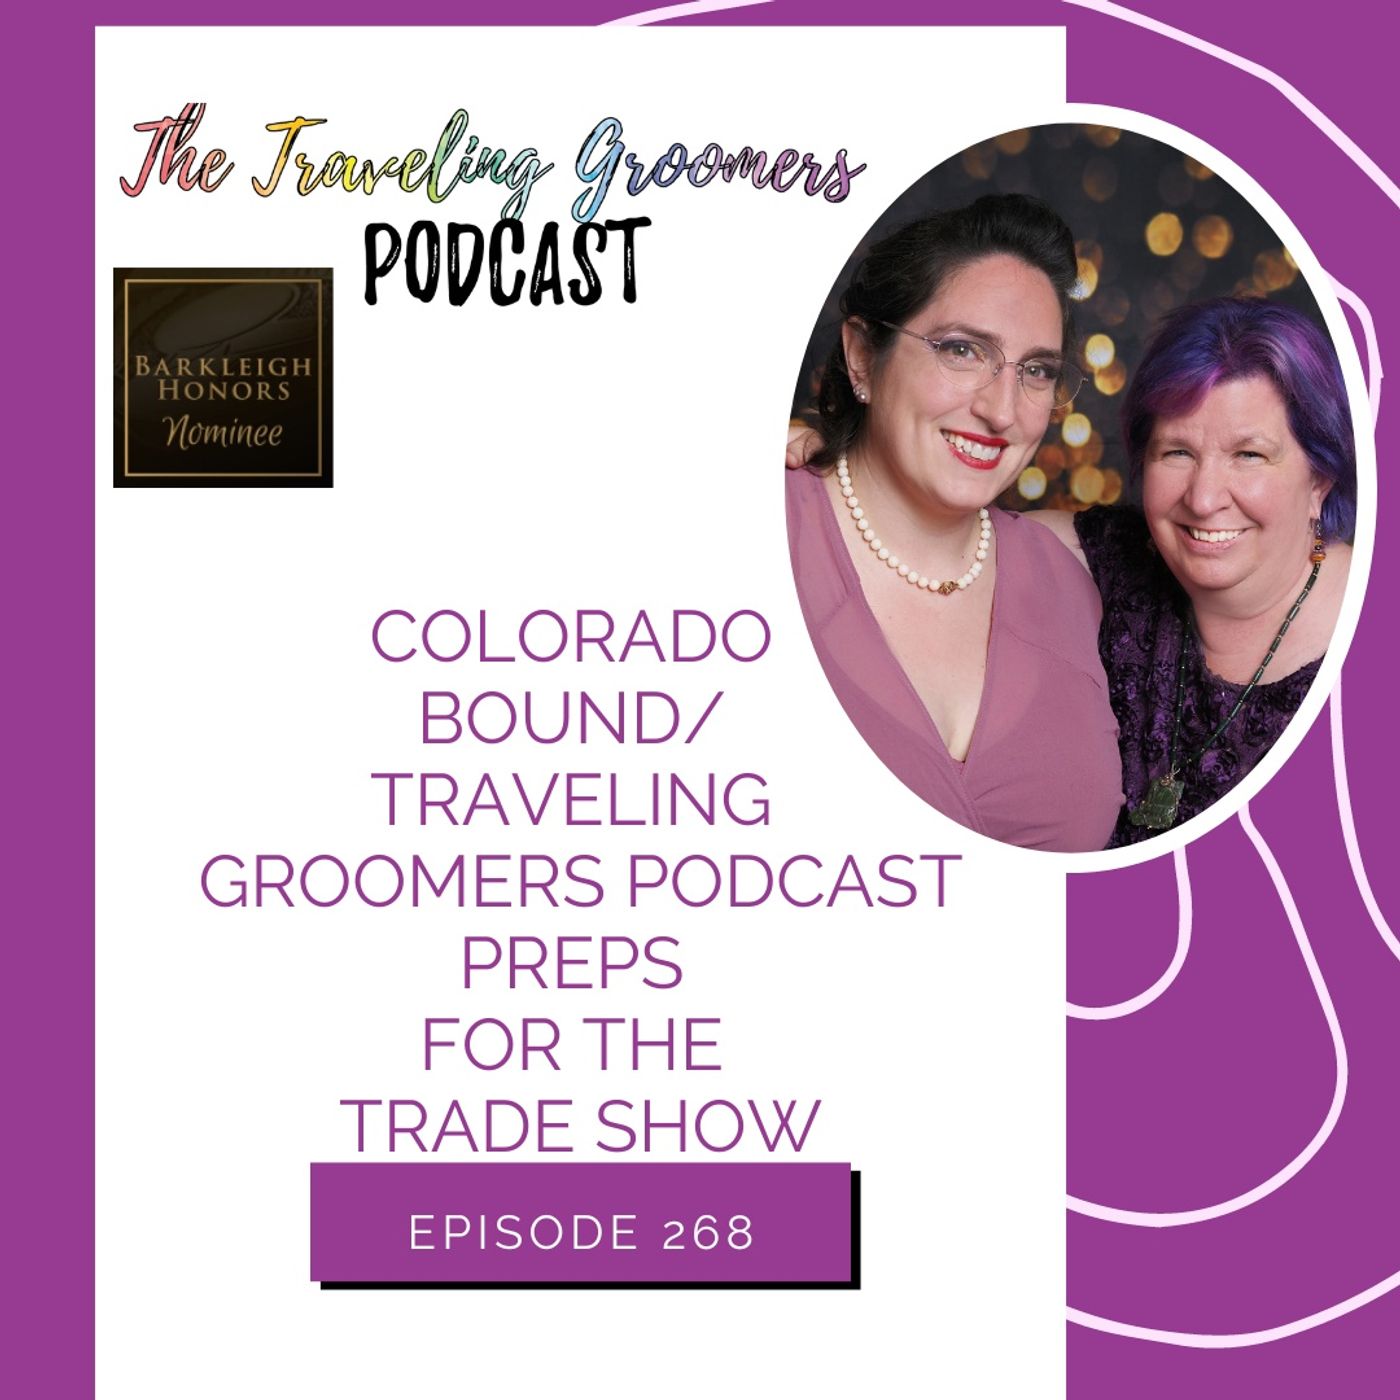 Colorado Bound Traveling Groomers Podcast Preps for the Trade Show